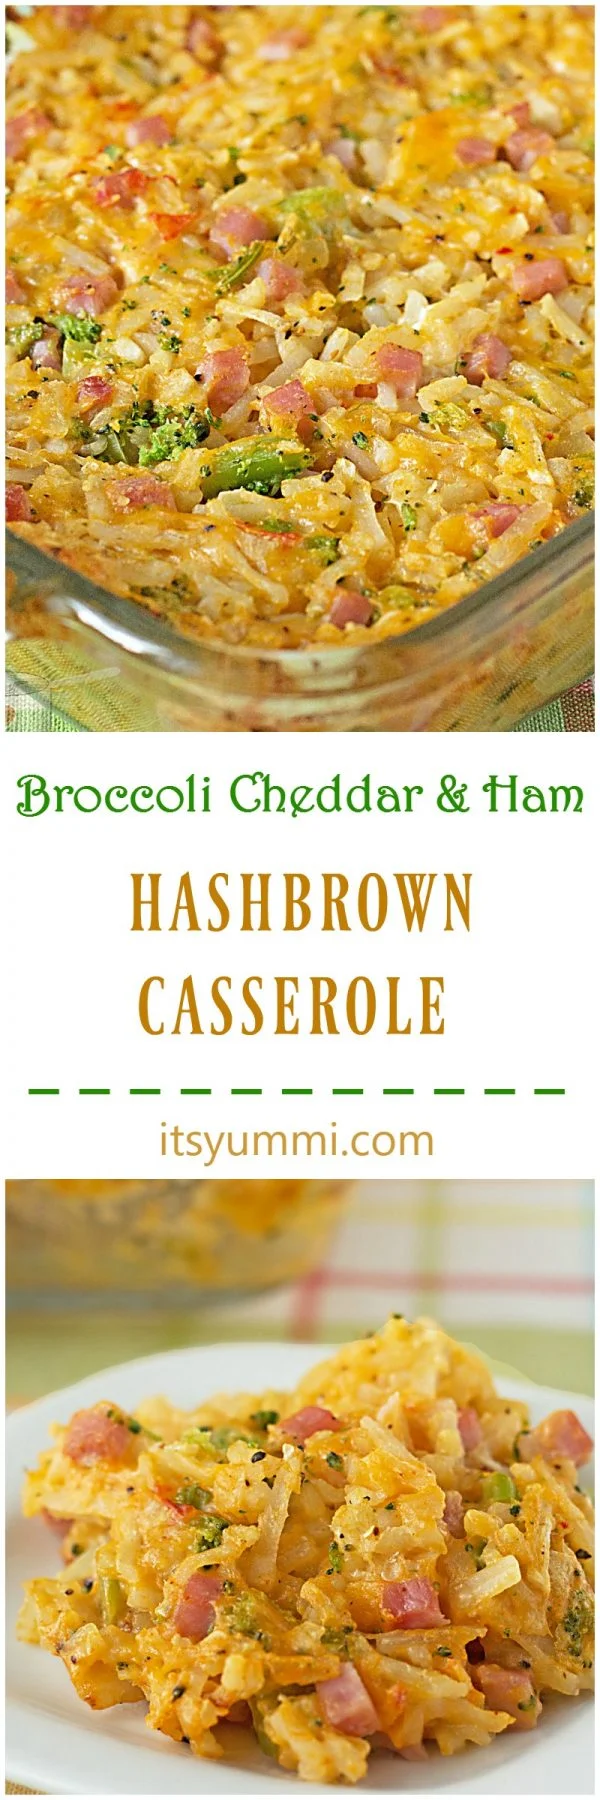 hashbrown casserole with ham, broccoli and cheddar cheese